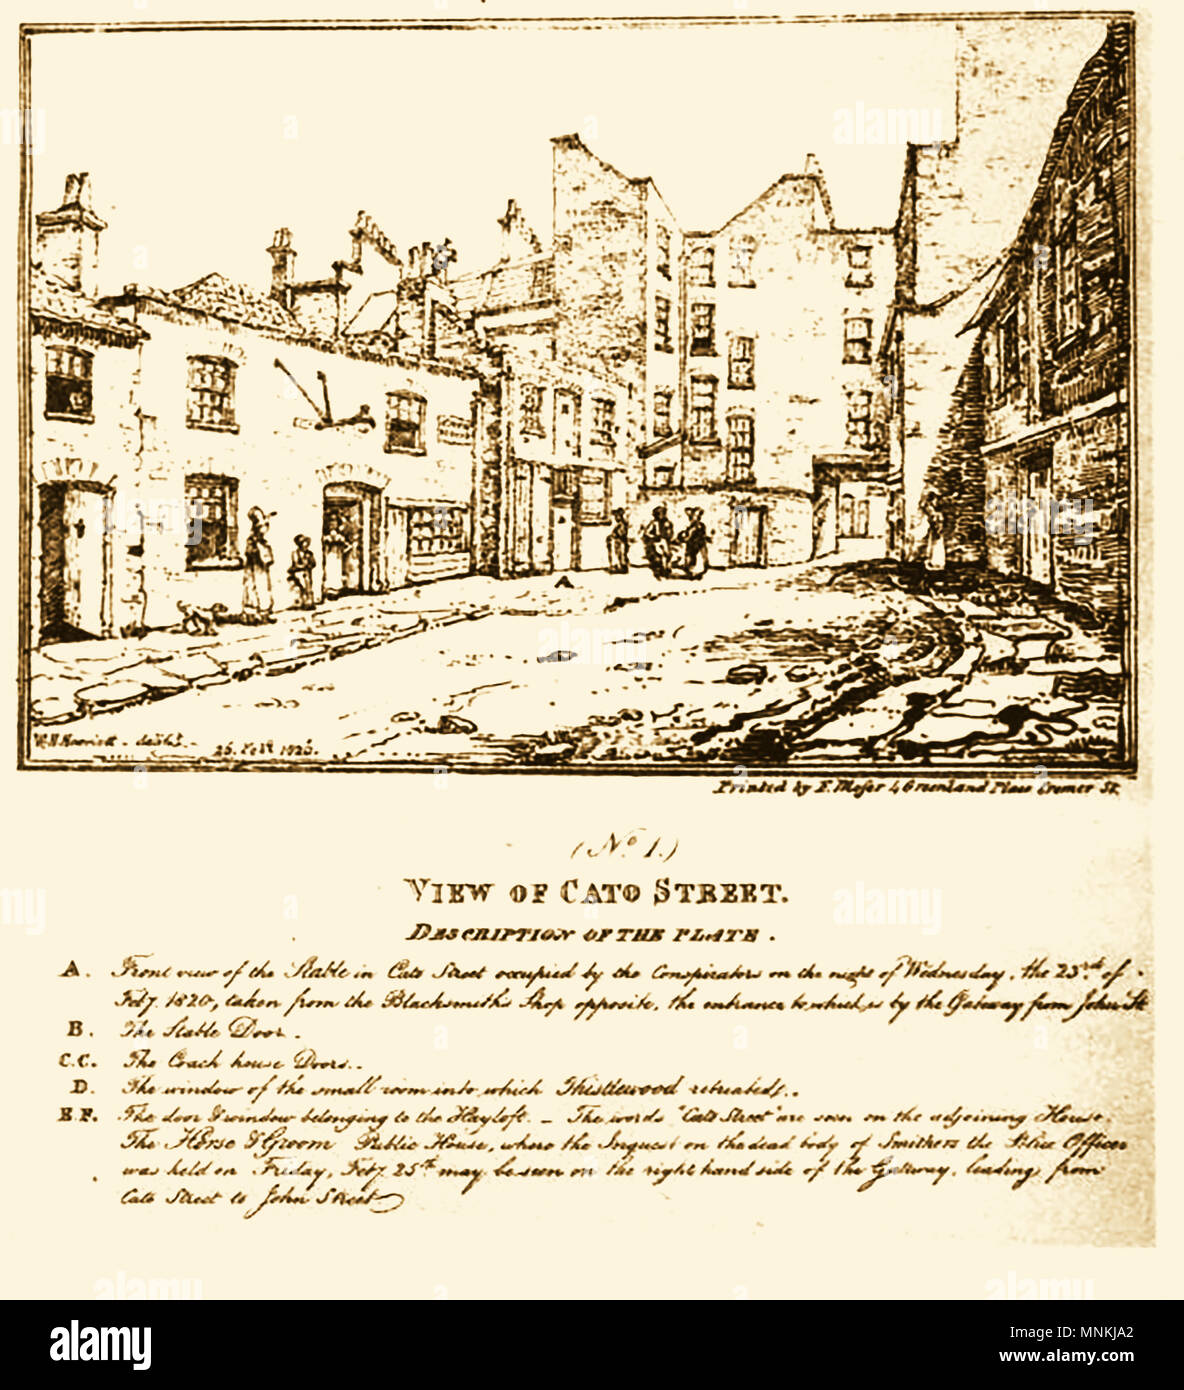 Cato street conspiracy / plot (A UK  attempt to murder all the British cabinet ministers and Prime Minister in 1820 - A view of the street Stock Photo